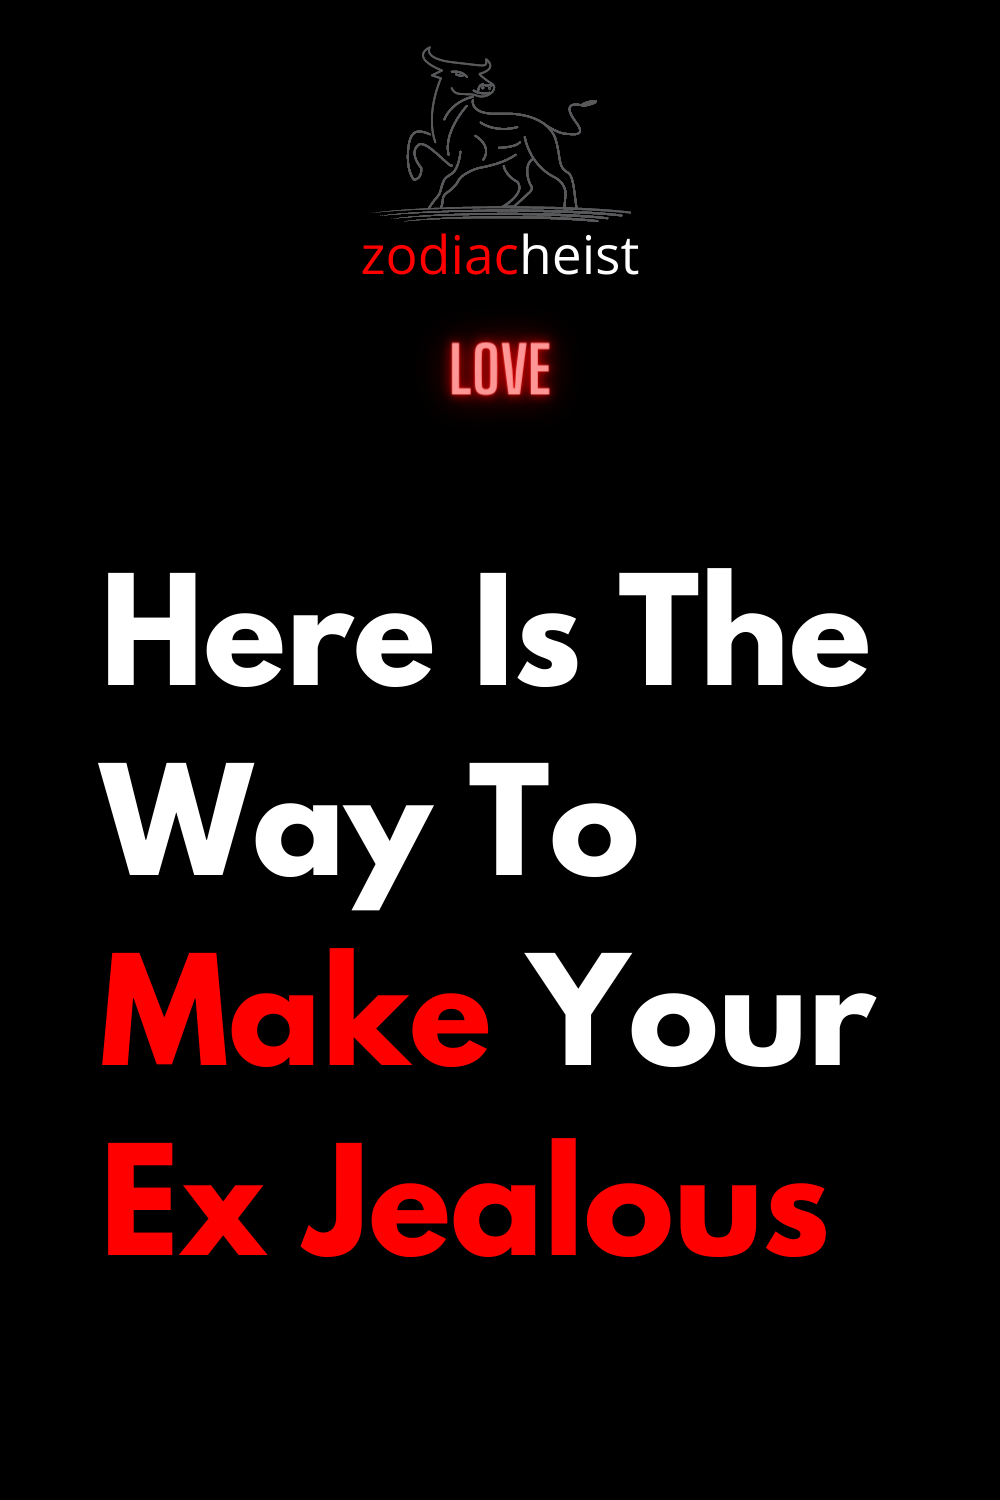 Here Is The Way To Make Your Ex Jealous